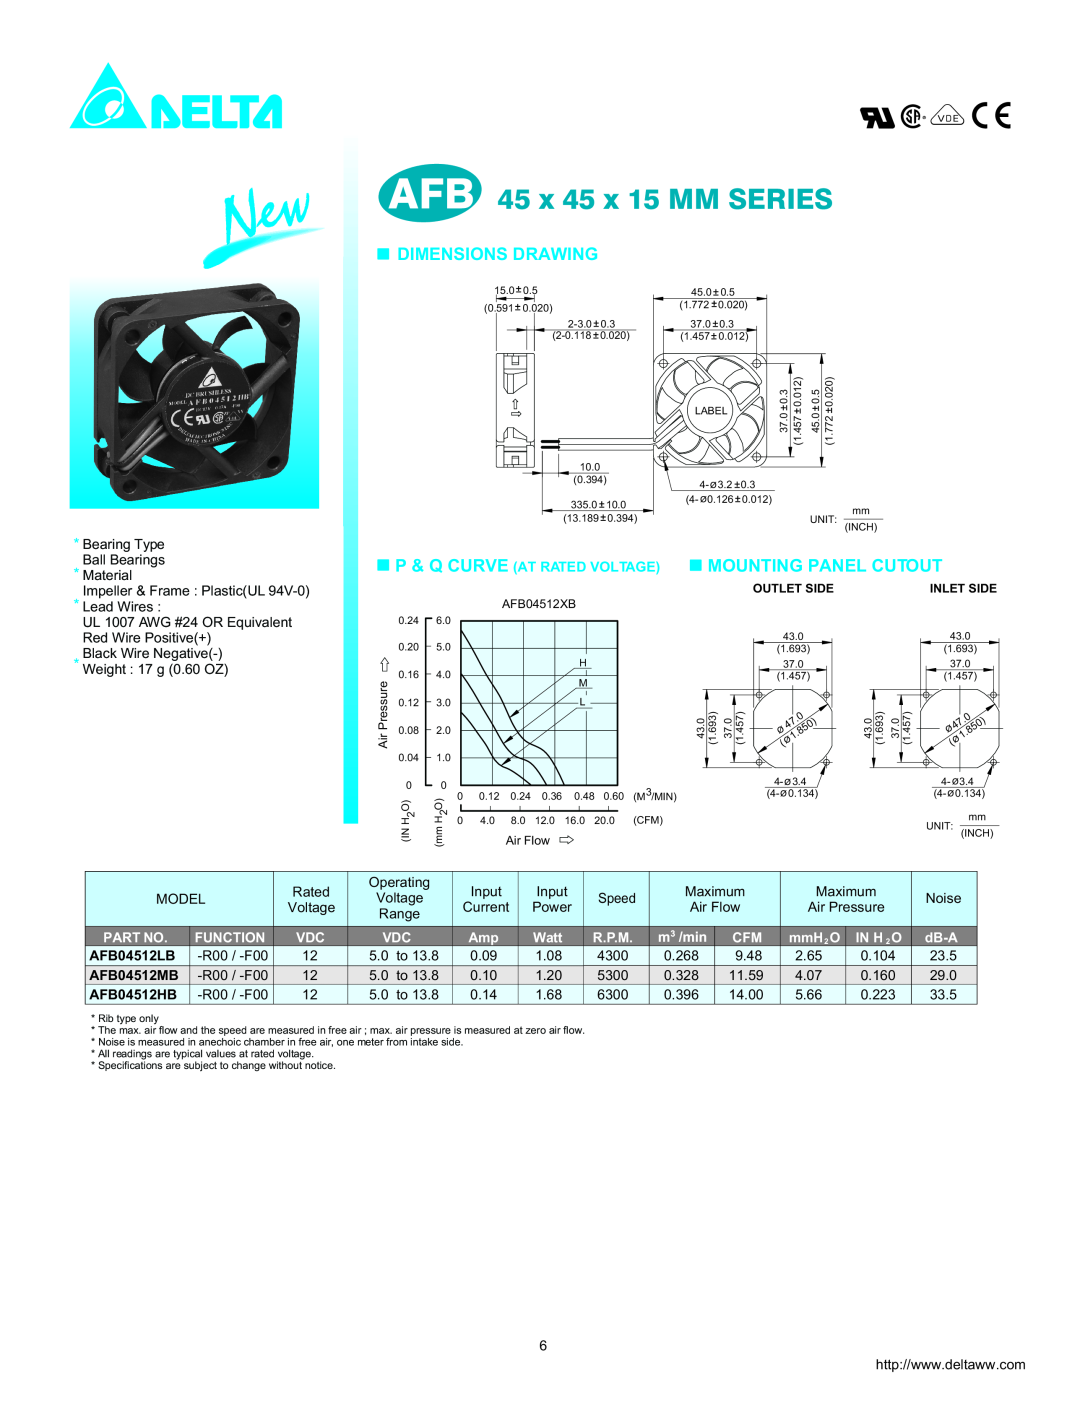 Delta Electronics AFB04512HB dimensions AFB 45 x 45 x 15 MM SERIES, Dimensions Drawing, Mounting Panel Cutout, Function 